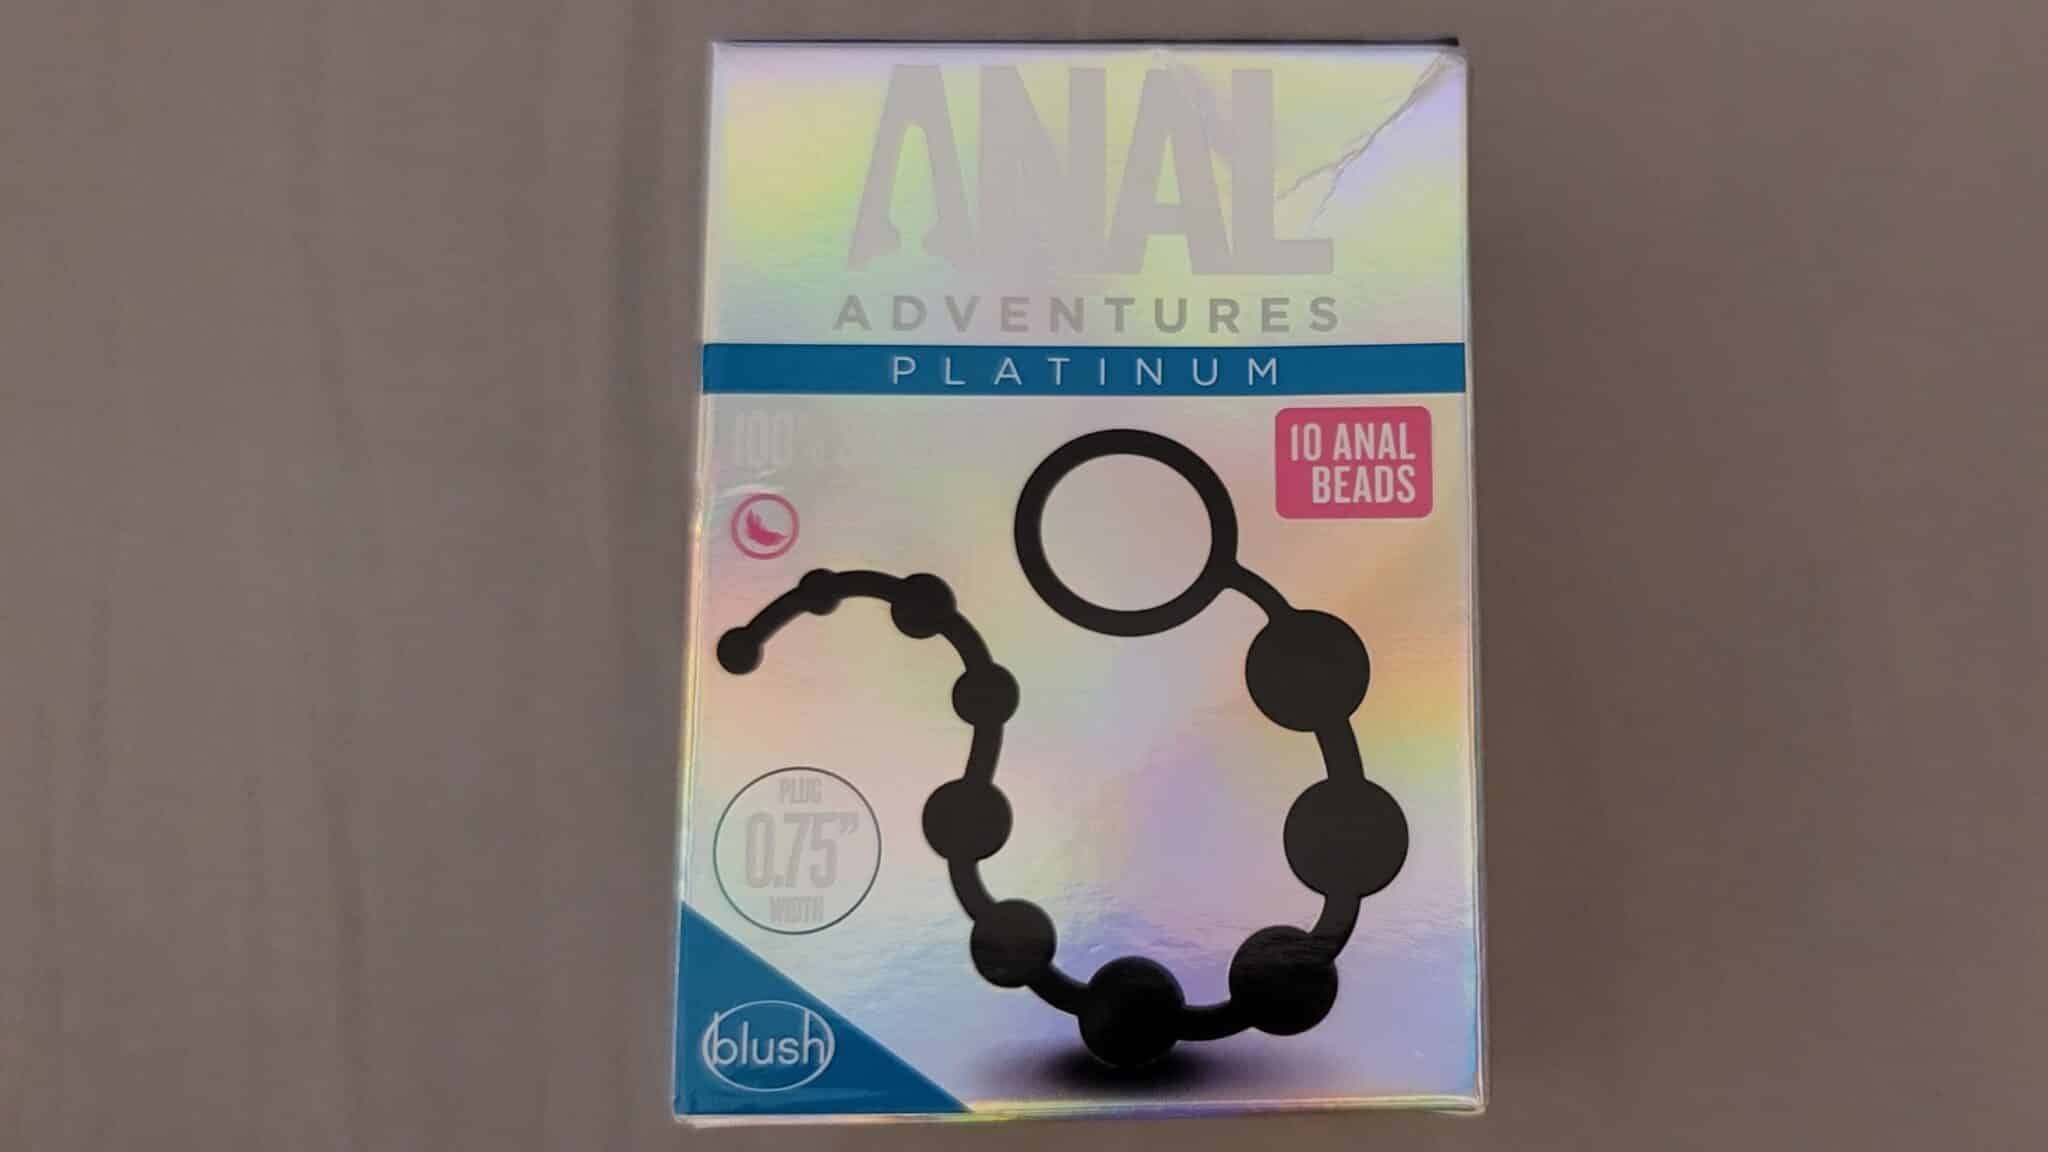 Anal Adventures Platinum Anal Beads Packaging: A Testament to Quality?